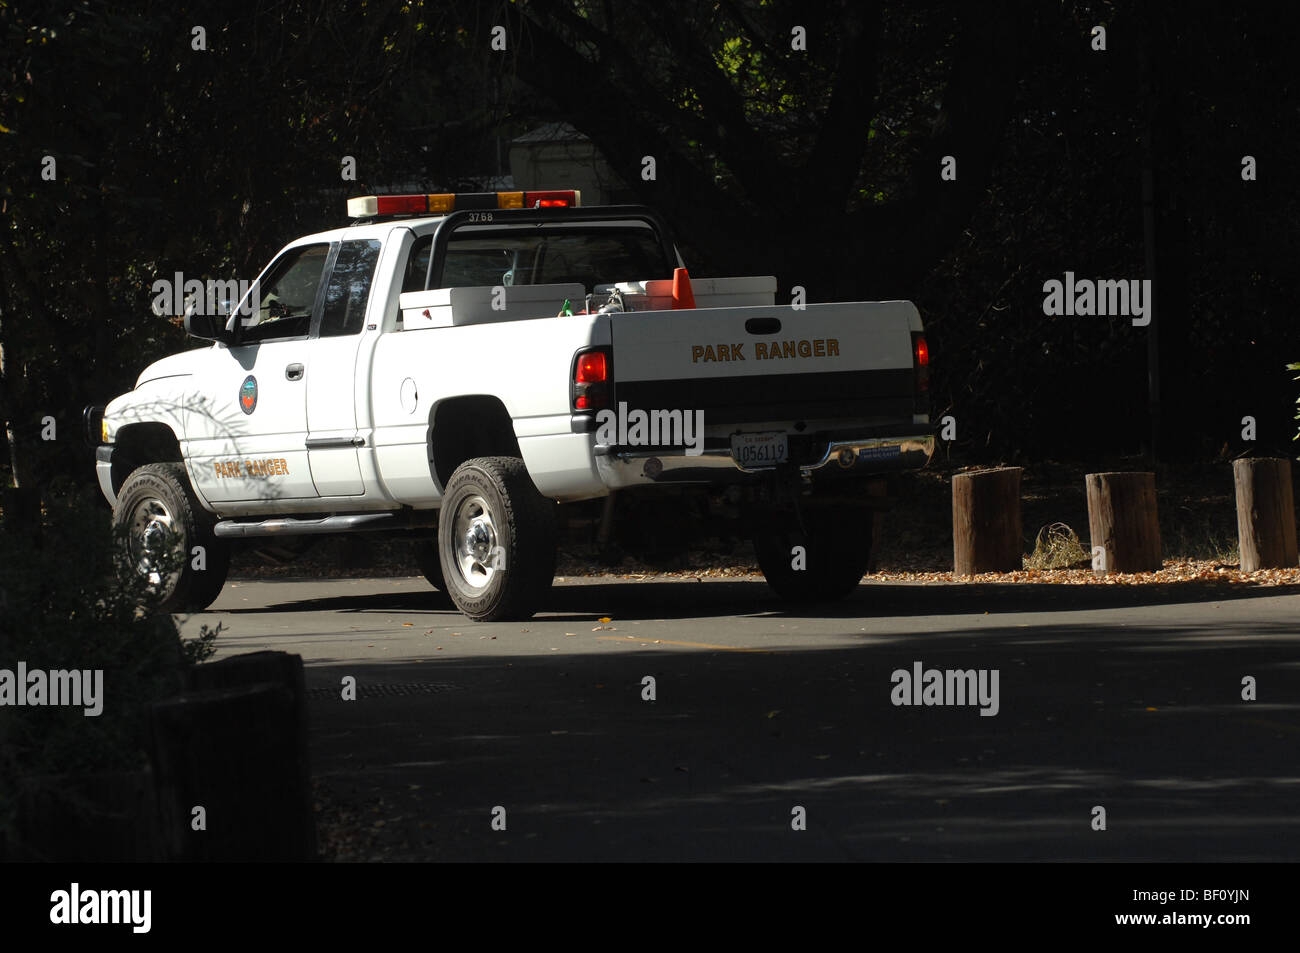 A Park Ranger vehicle patrols Irvine Regional Park in a white truck with flashing lights on top. Stock Photo